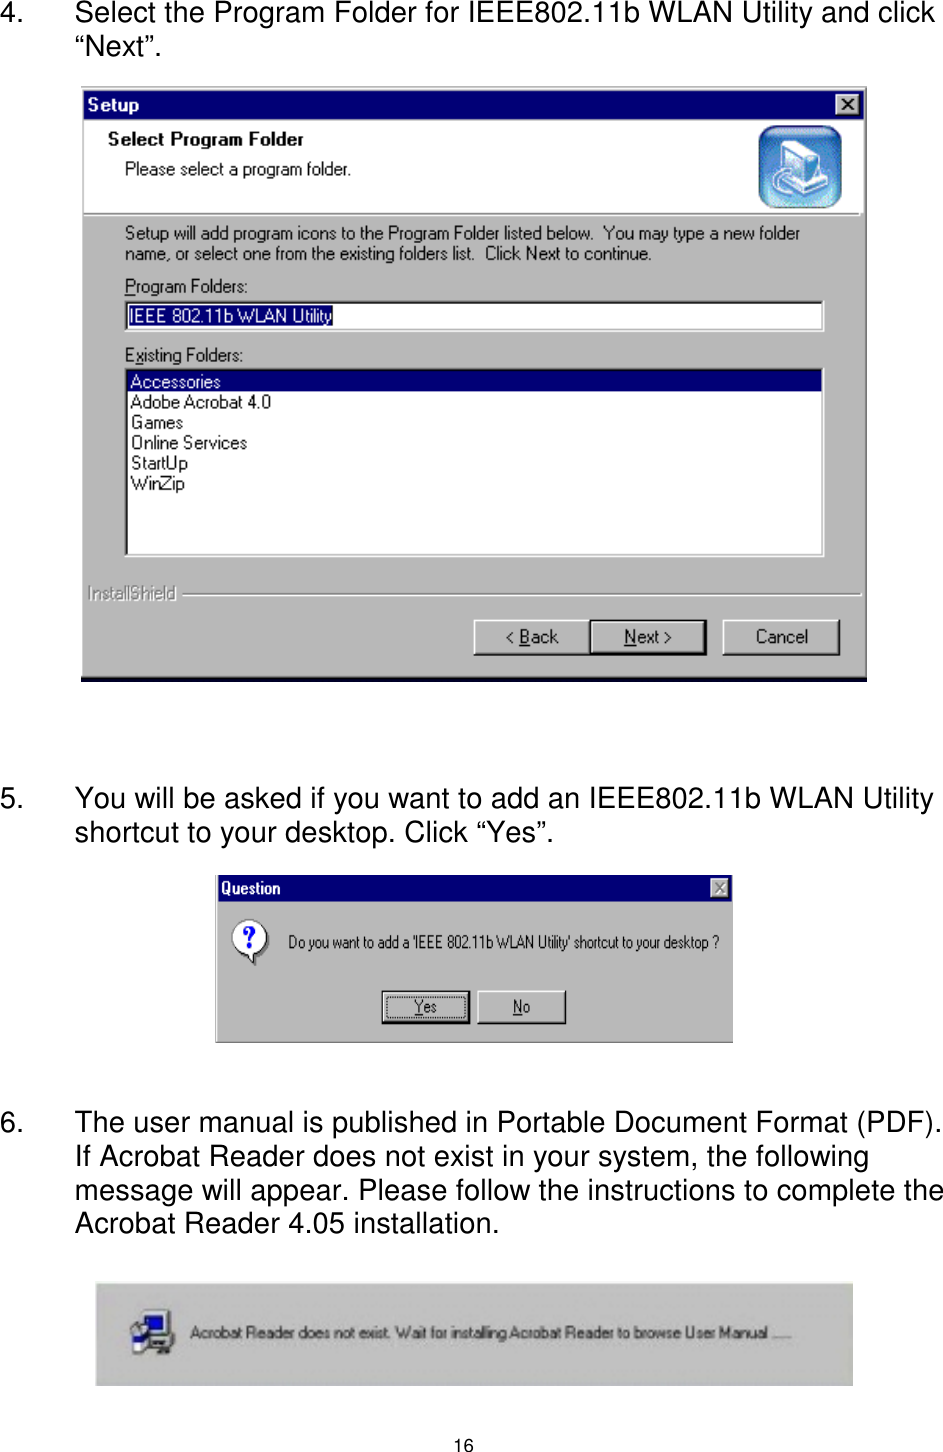  16 4.  Select the Program Folder for IEEE802.11b WLAN Utility and click “Next”.                 5.  You will be asked if you want to add an IEEE802.11b WLAN Utility shortcut to your desktop. Click “Yes”.      6.  The user manual is published in Portable Document Format (PDF). If Acrobat Reader does not exist in your system, the following message will appear. Please follow the instructions to complete the Acrobat Reader 4.05 installation.  